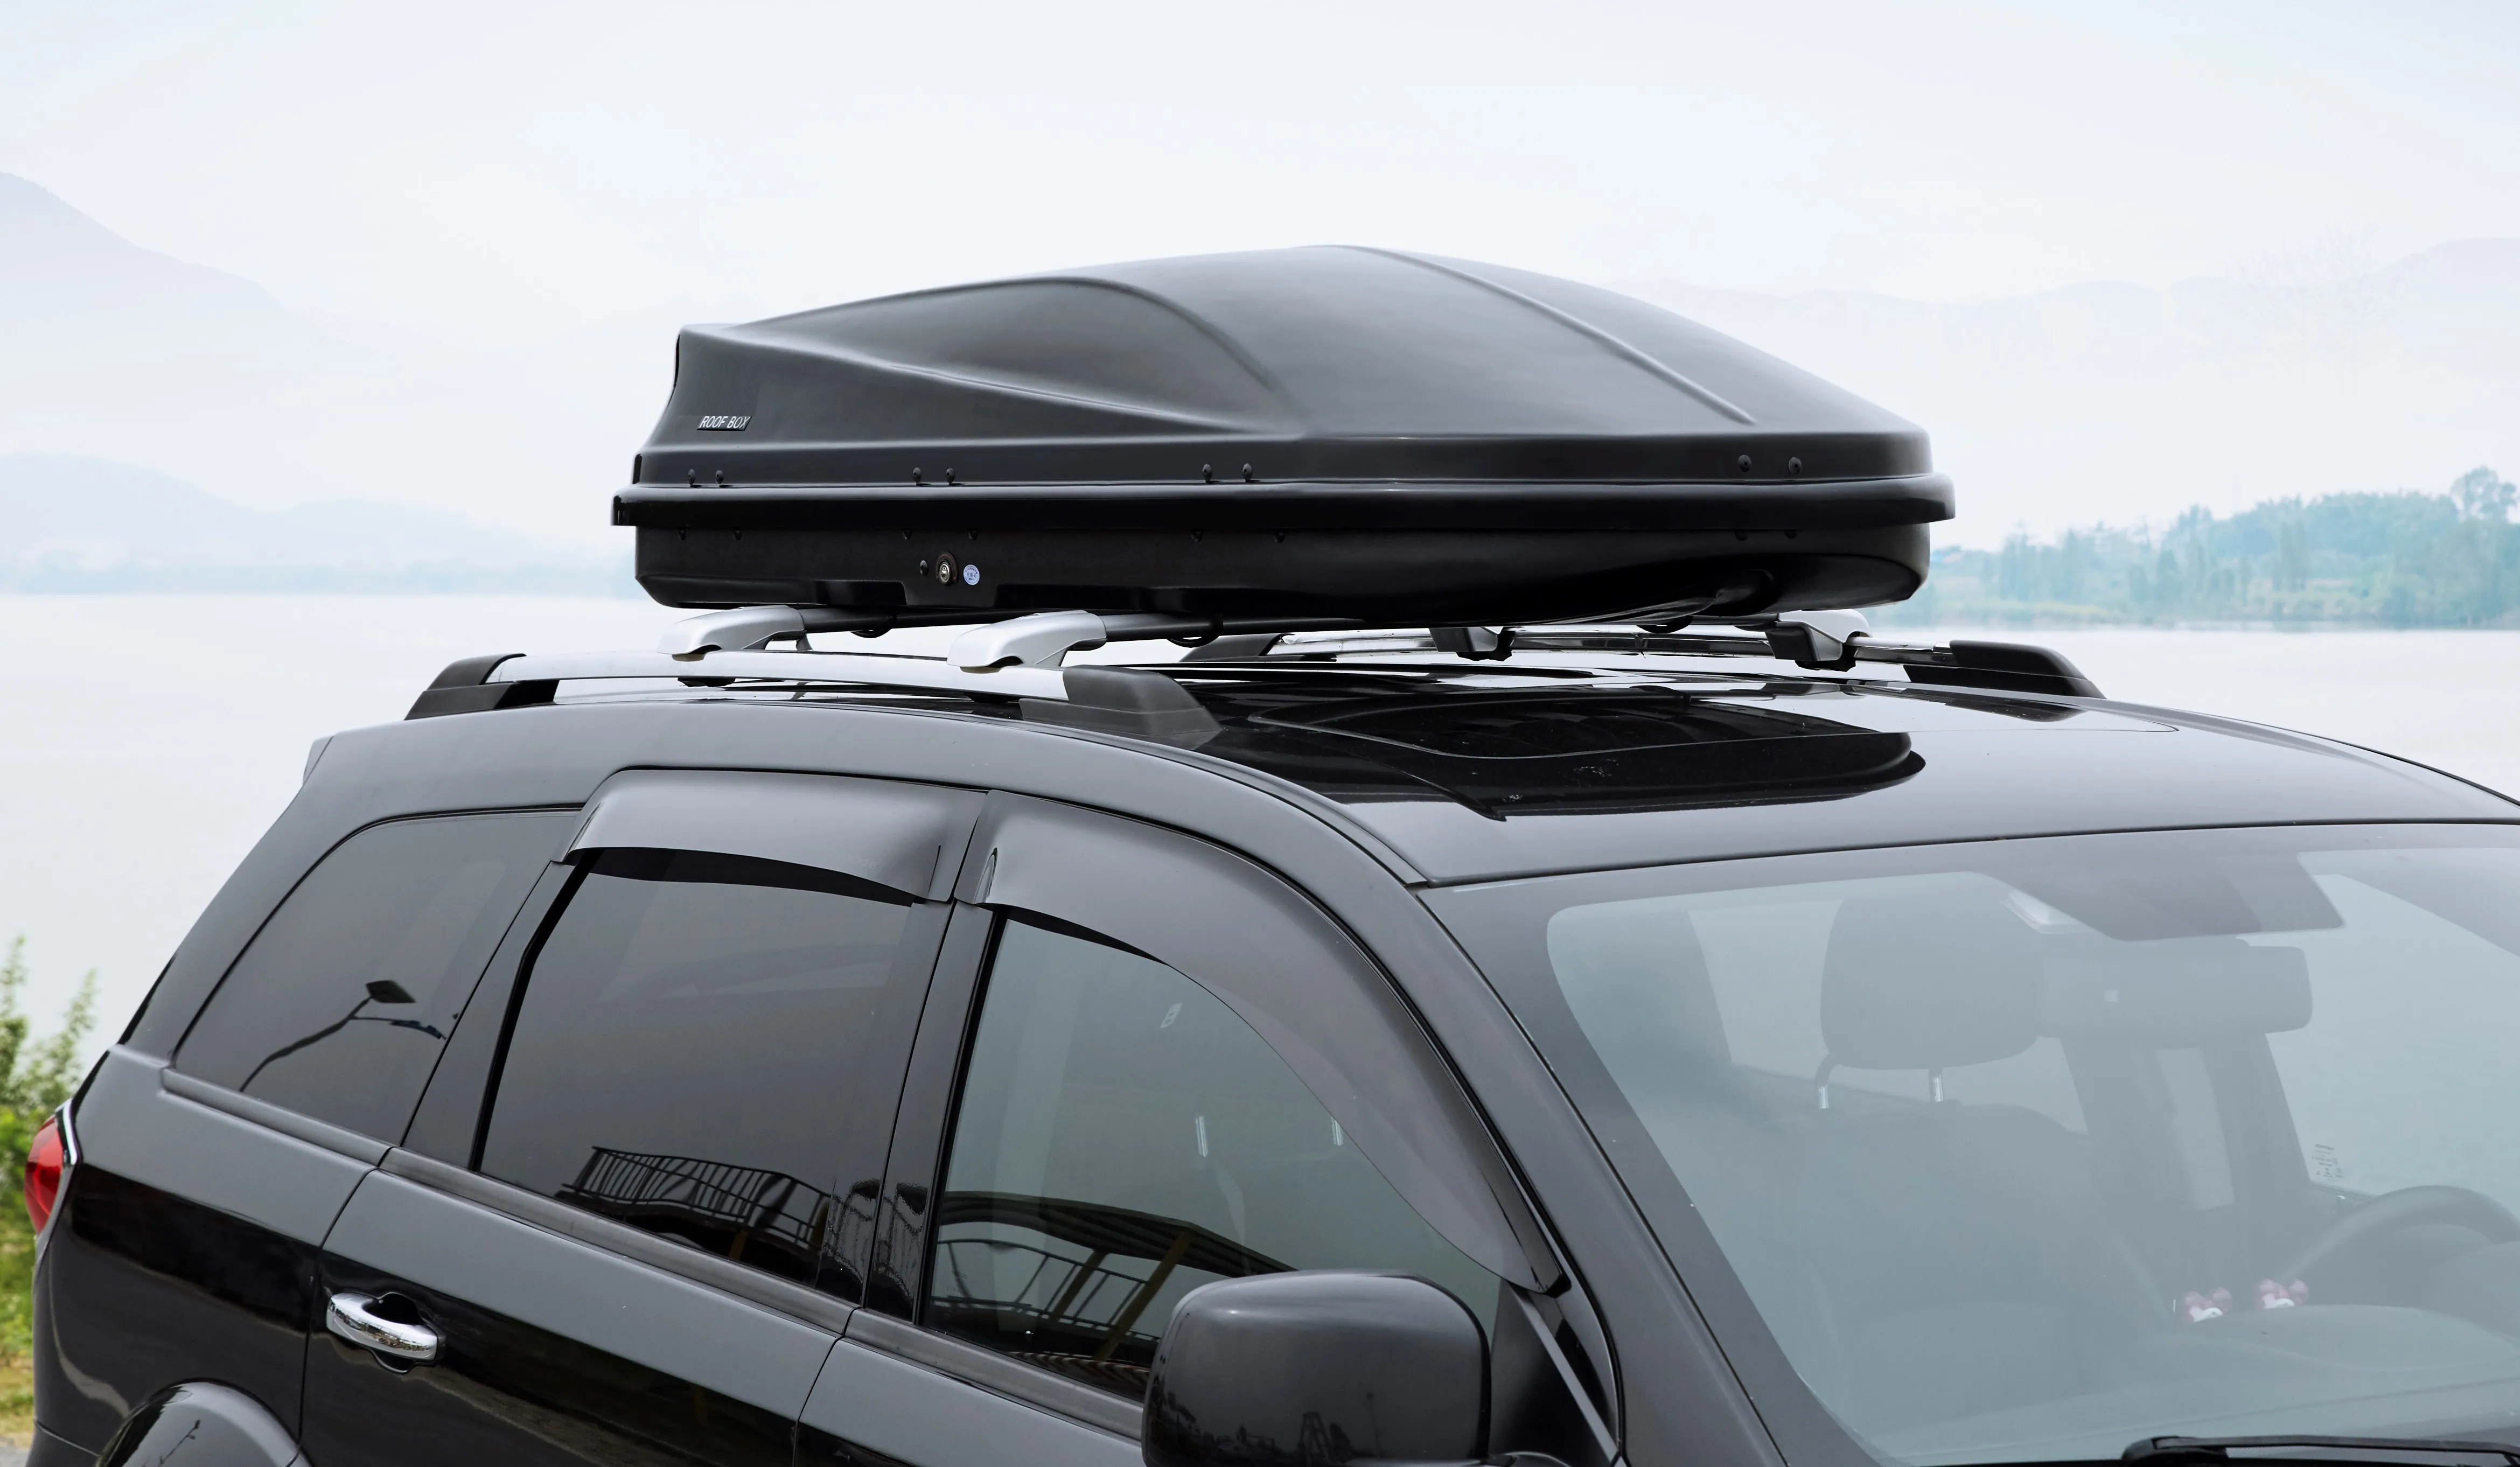 Hot Selling Exterior Accessories The New Storage Car Top Box Cargo Carrier Luggage Roof Box Fit Different Models